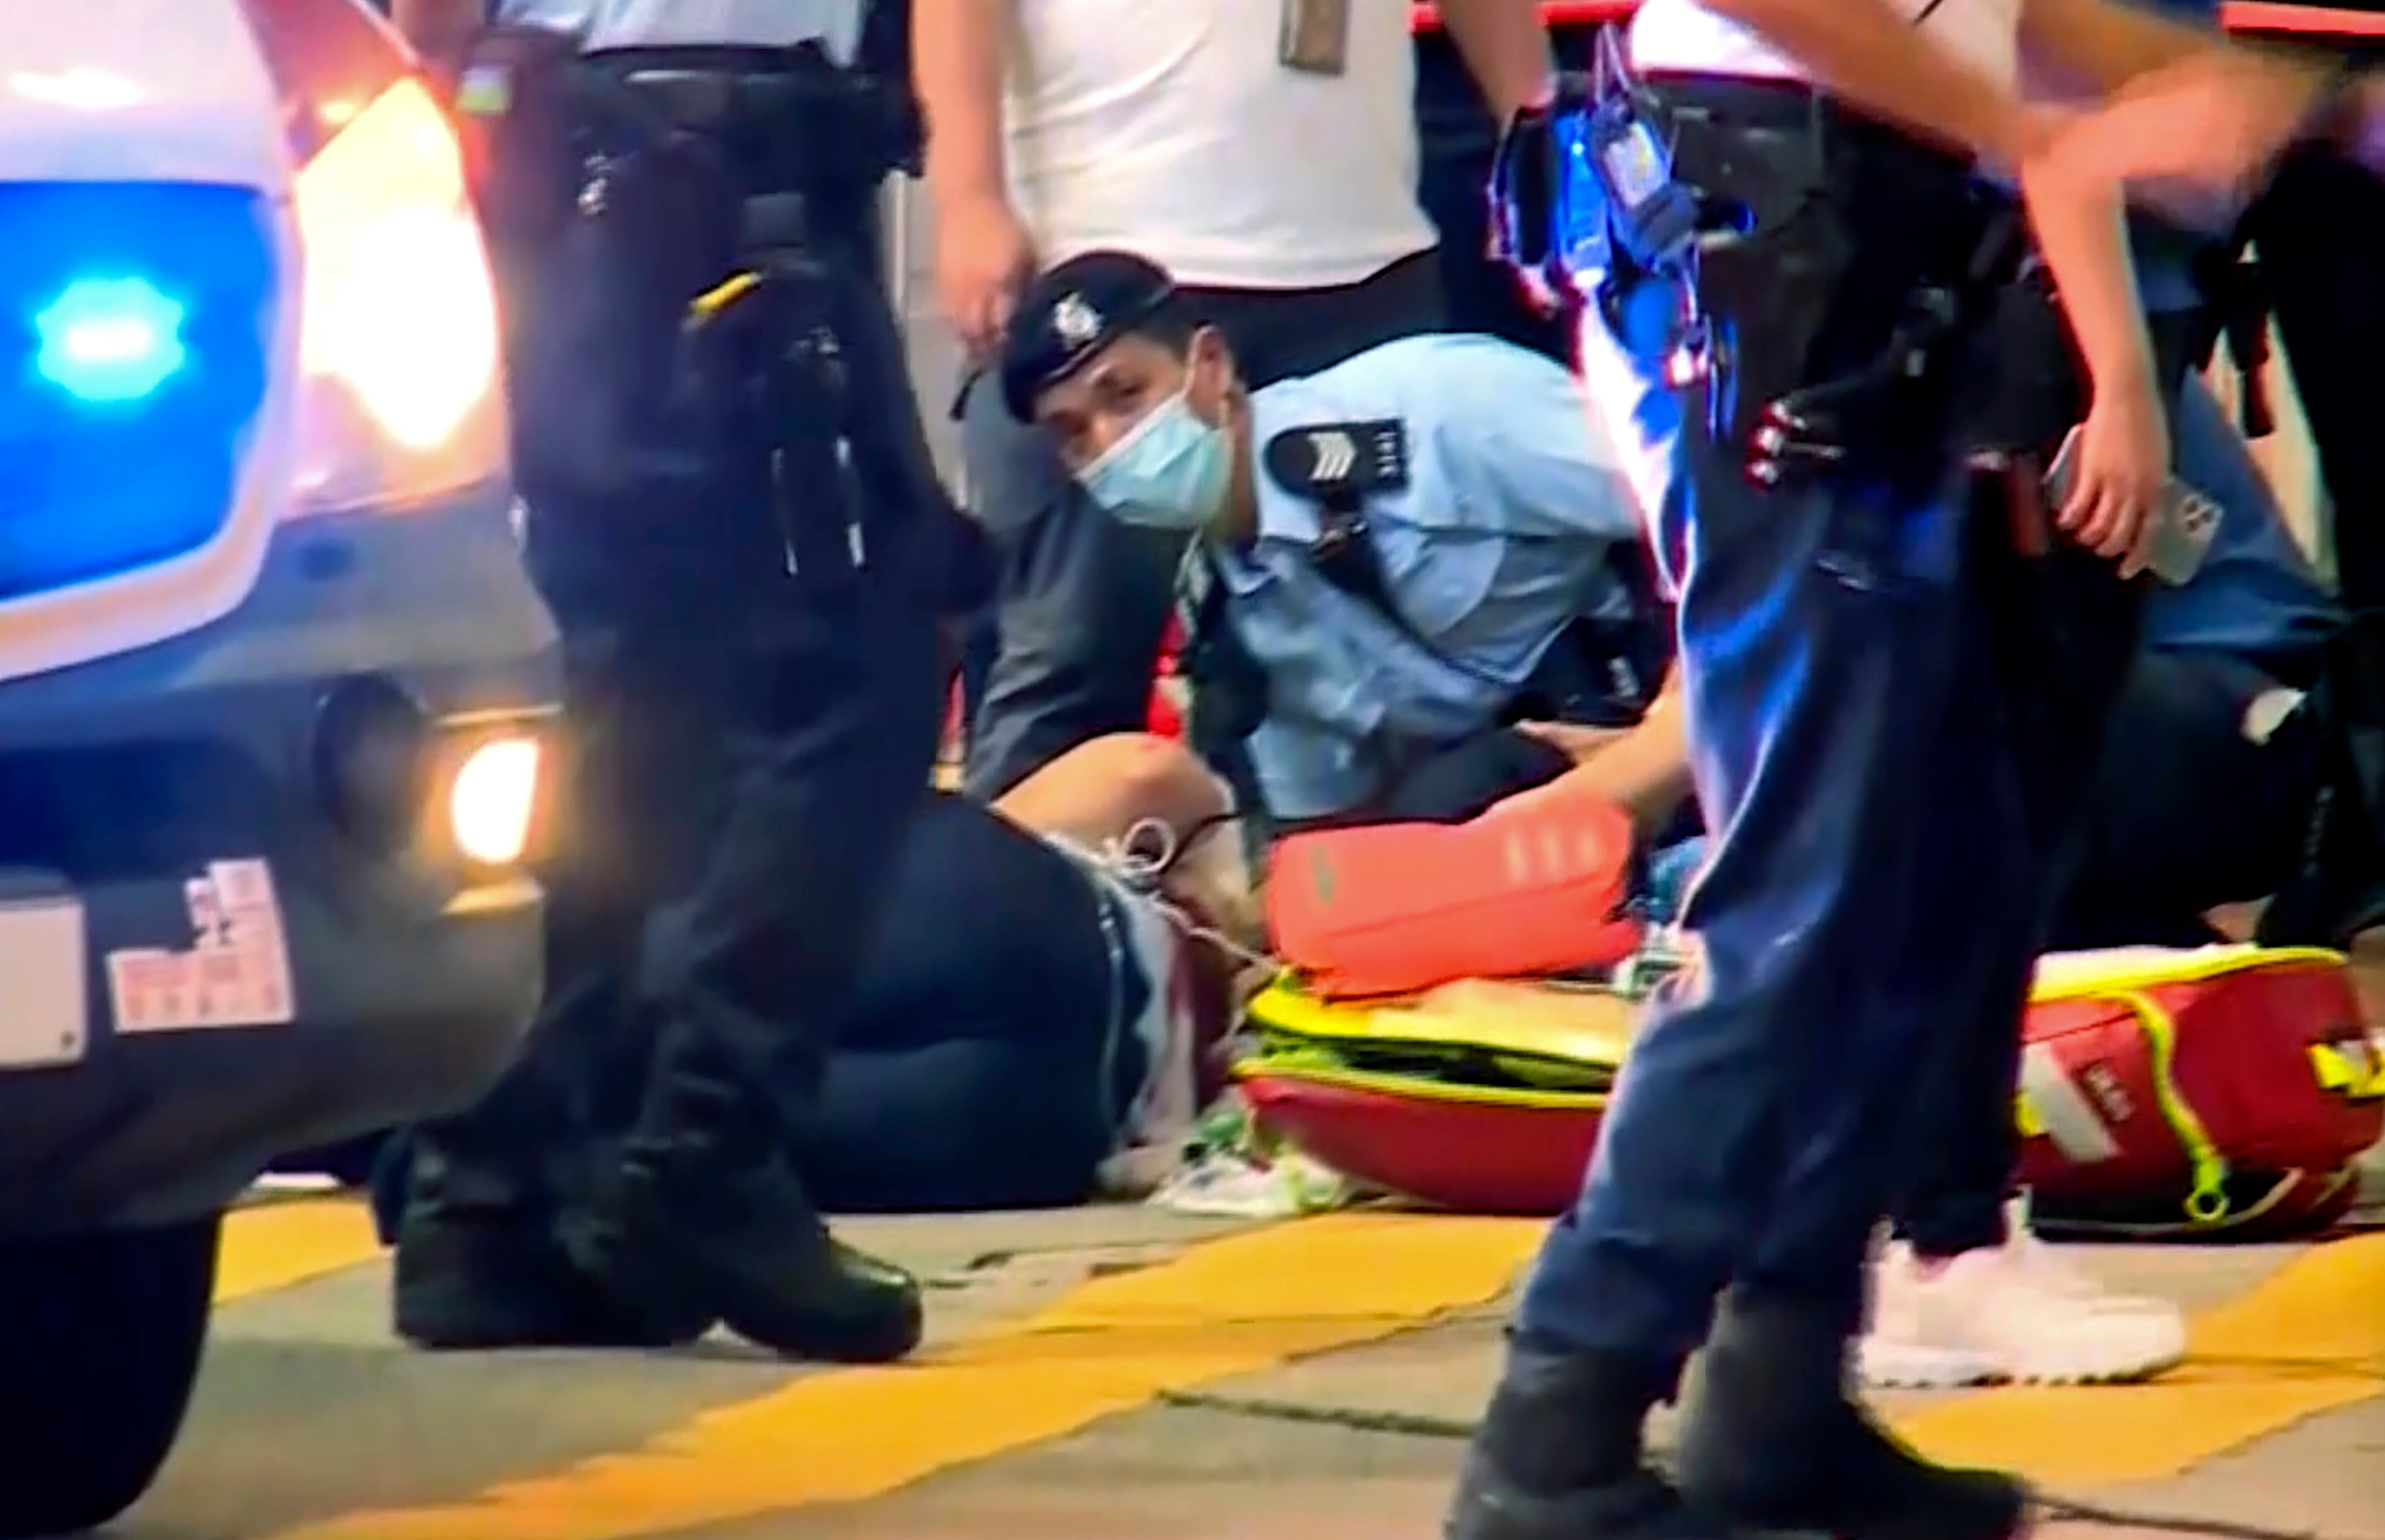 In this image from video provided by TVB, a police officer on the ground receives medical treatment after being stabbed by a man on a street in Causeway Bay of Hong Kong, 1 July 2021